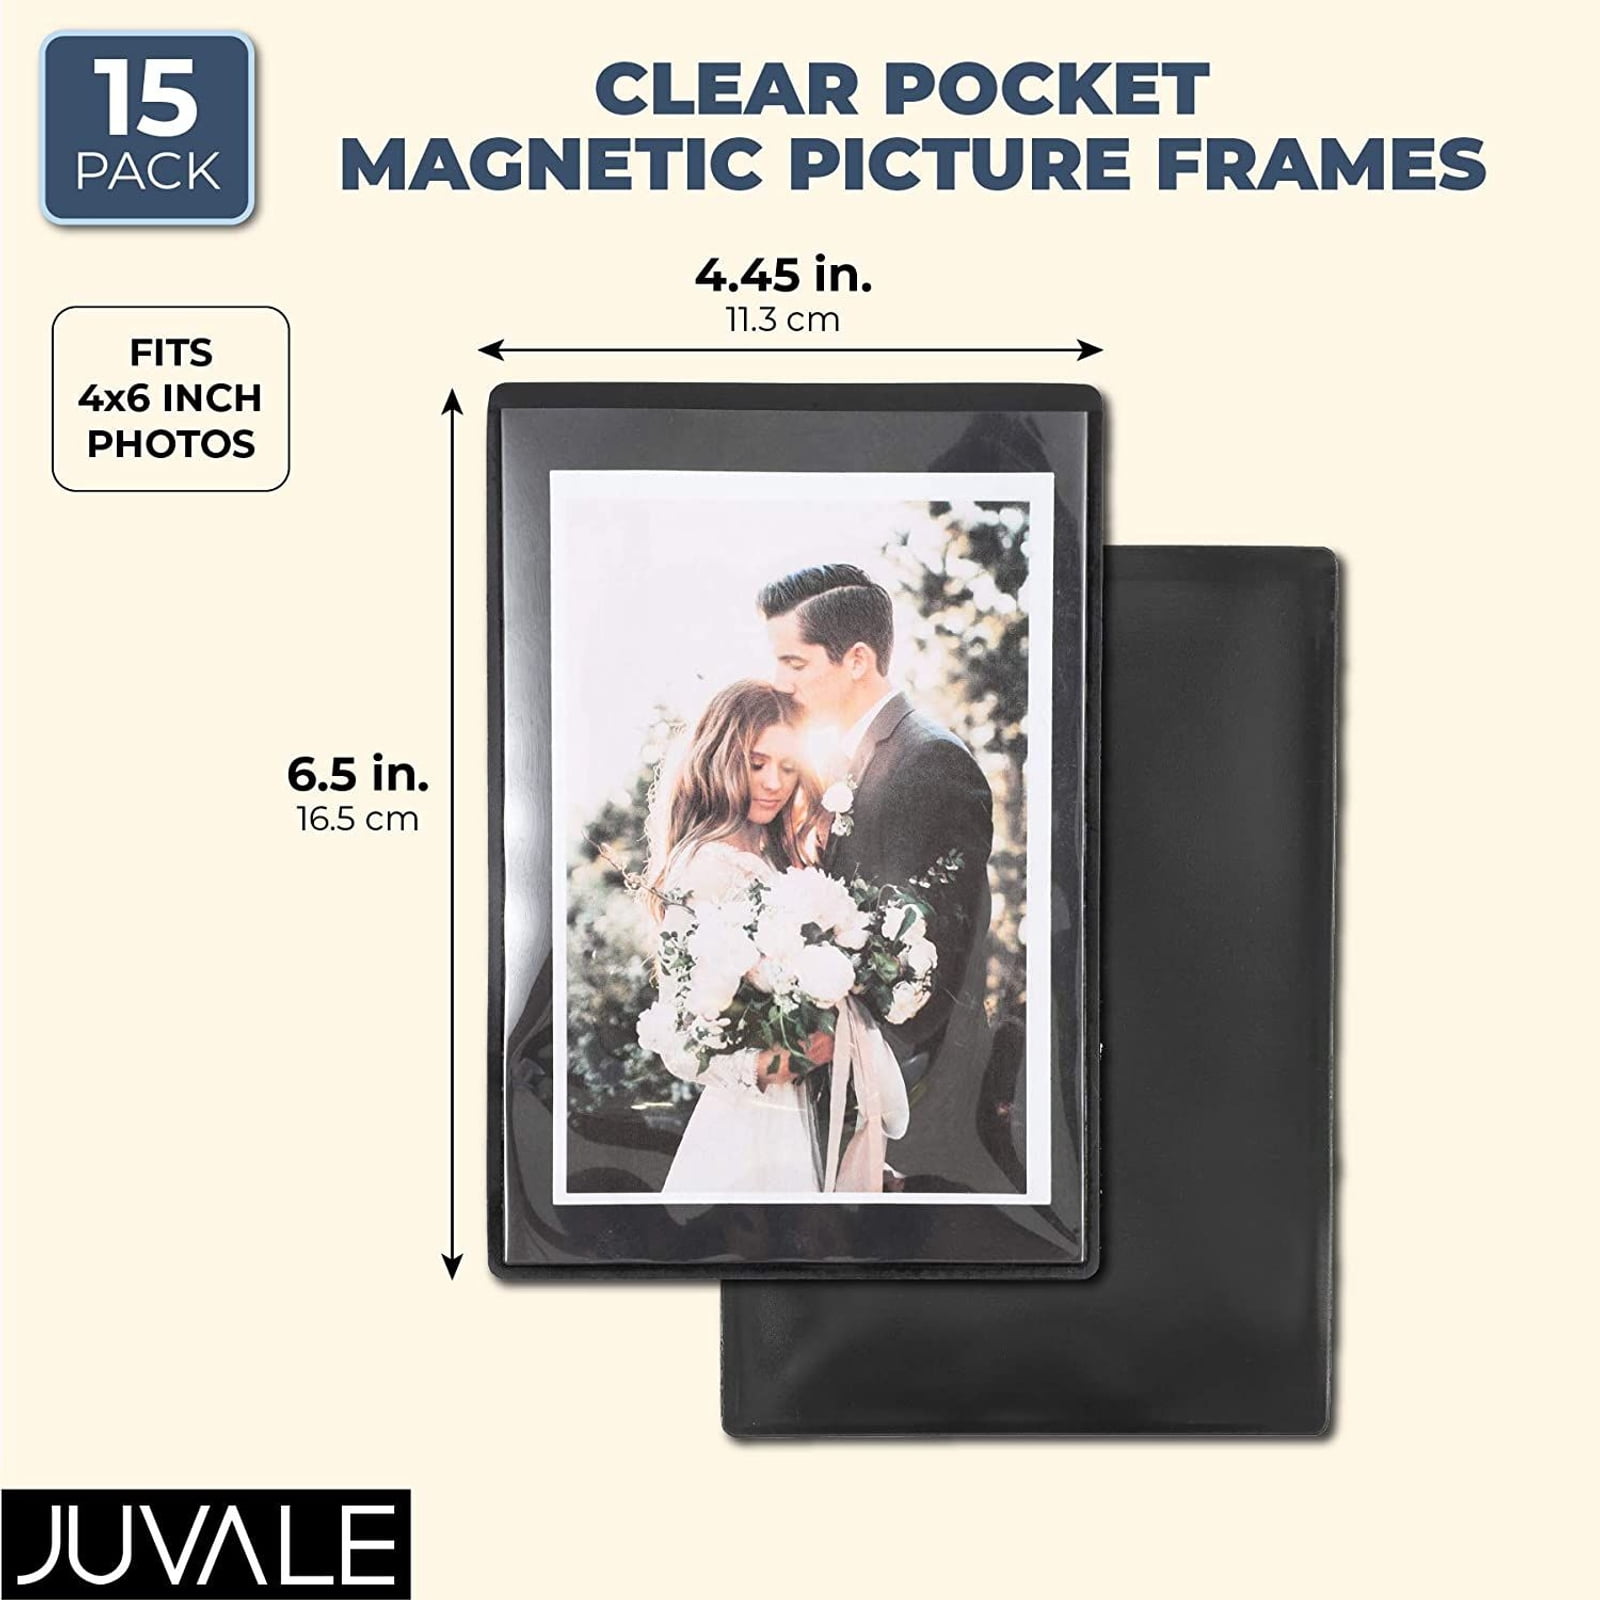 Complete Home Magnet Clear Frame 4x6 4 inch x 6 inch Clear